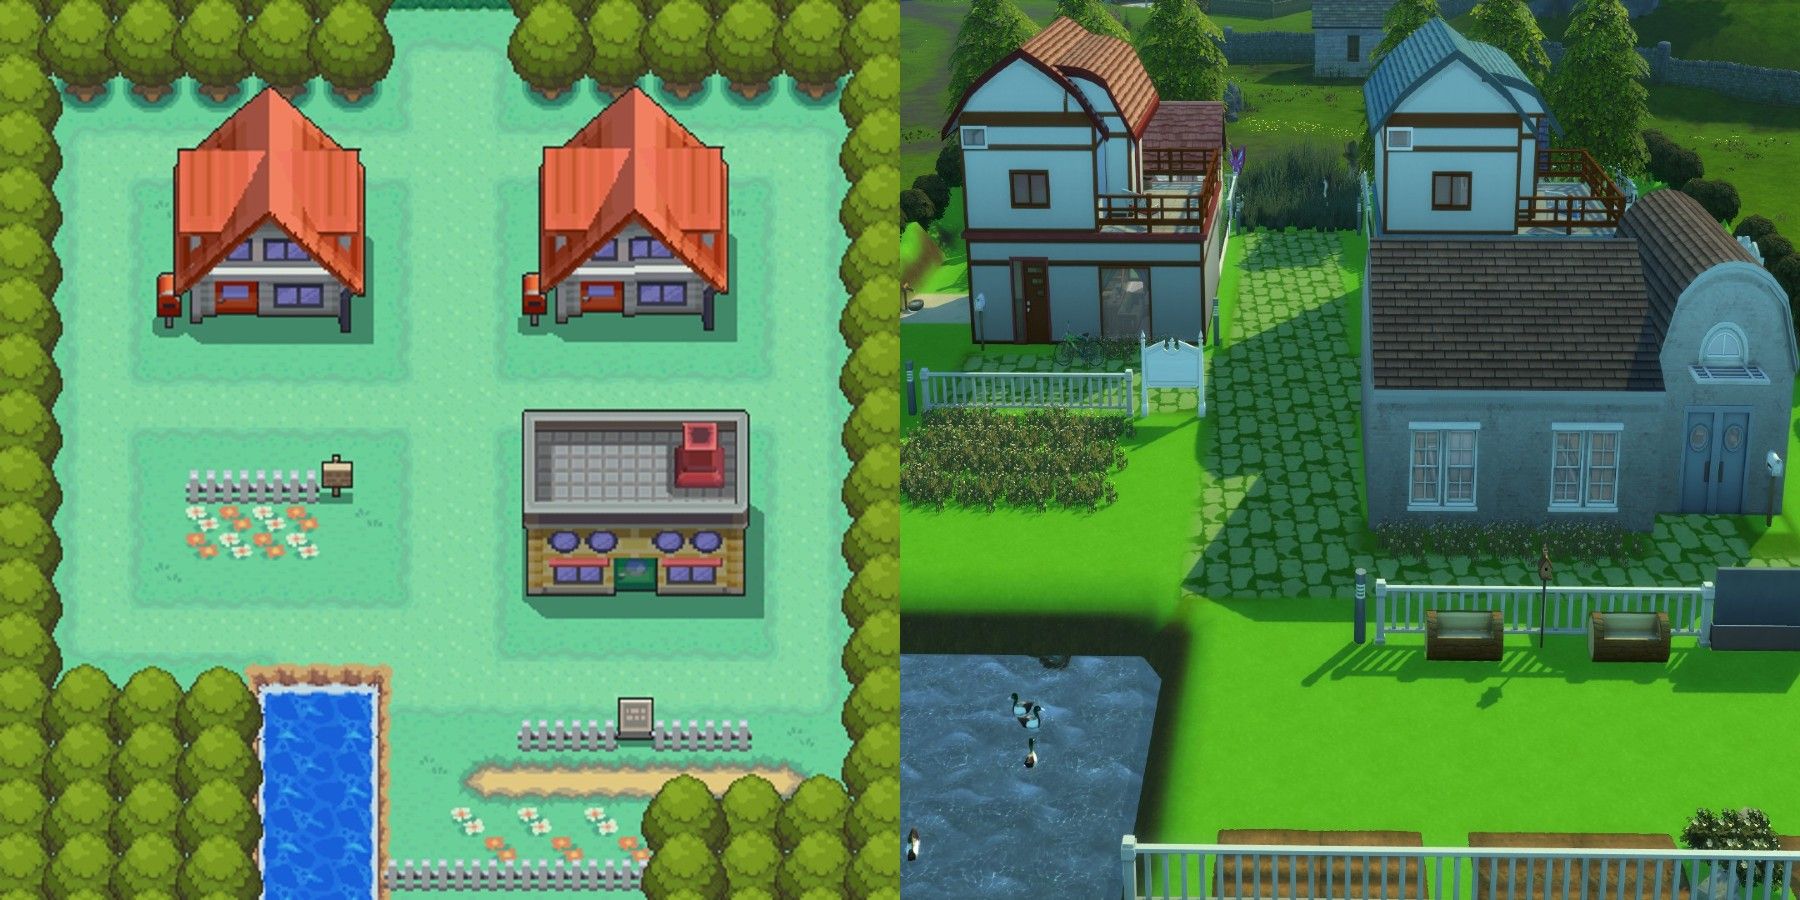 Pokemon Fan Recreates Their Favorite Locations in The Sims